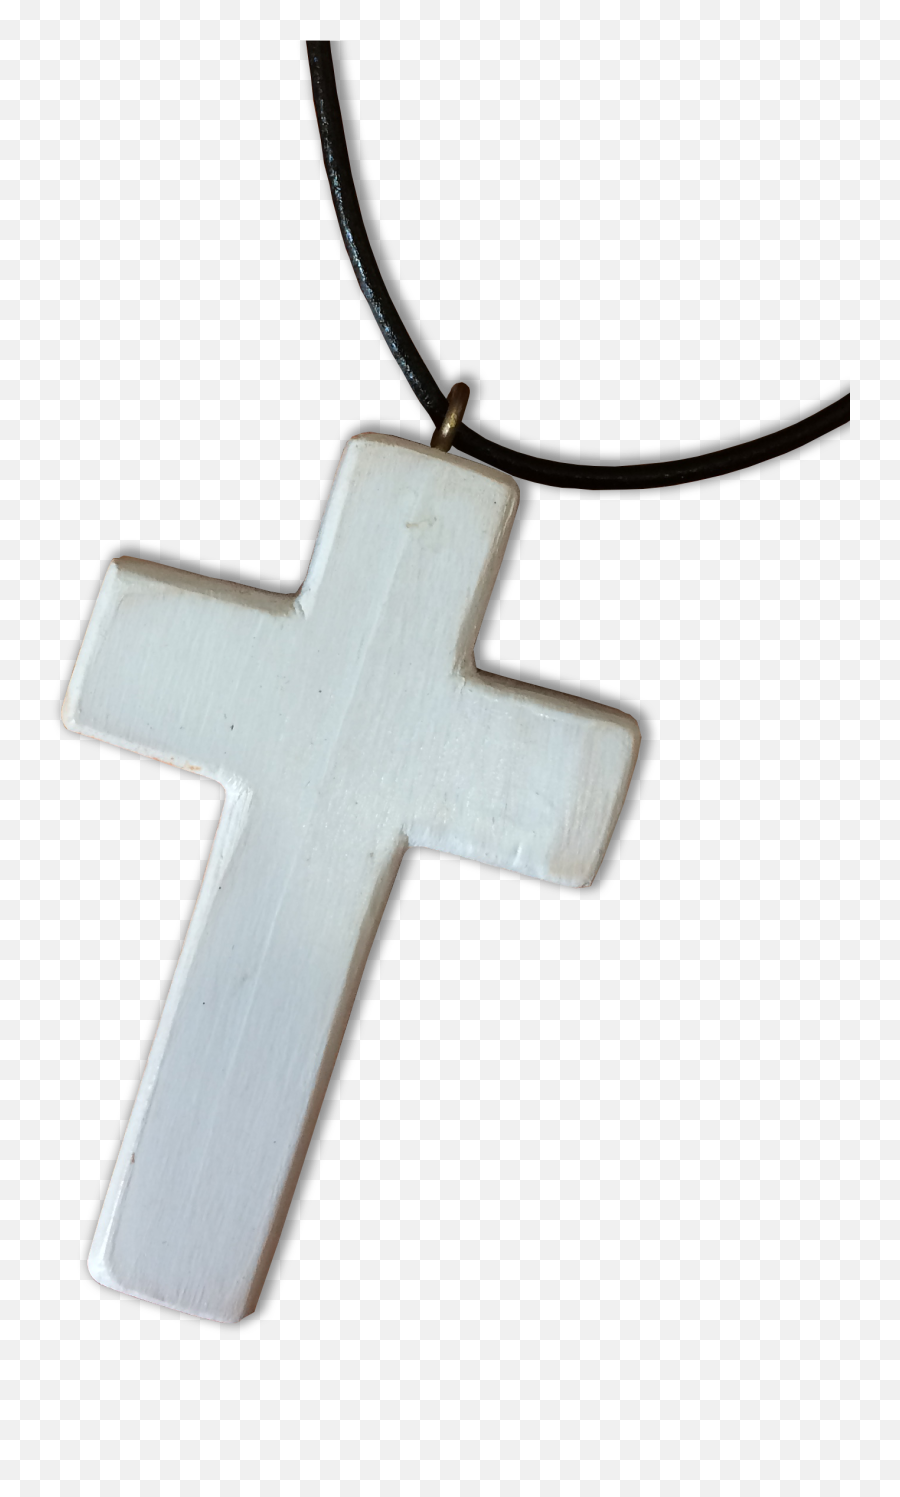 Download Hd Wooden Cross Necklace - Cross Necklace Crucifix Necklace Transparent Background Emoji,Wooden Cross Png